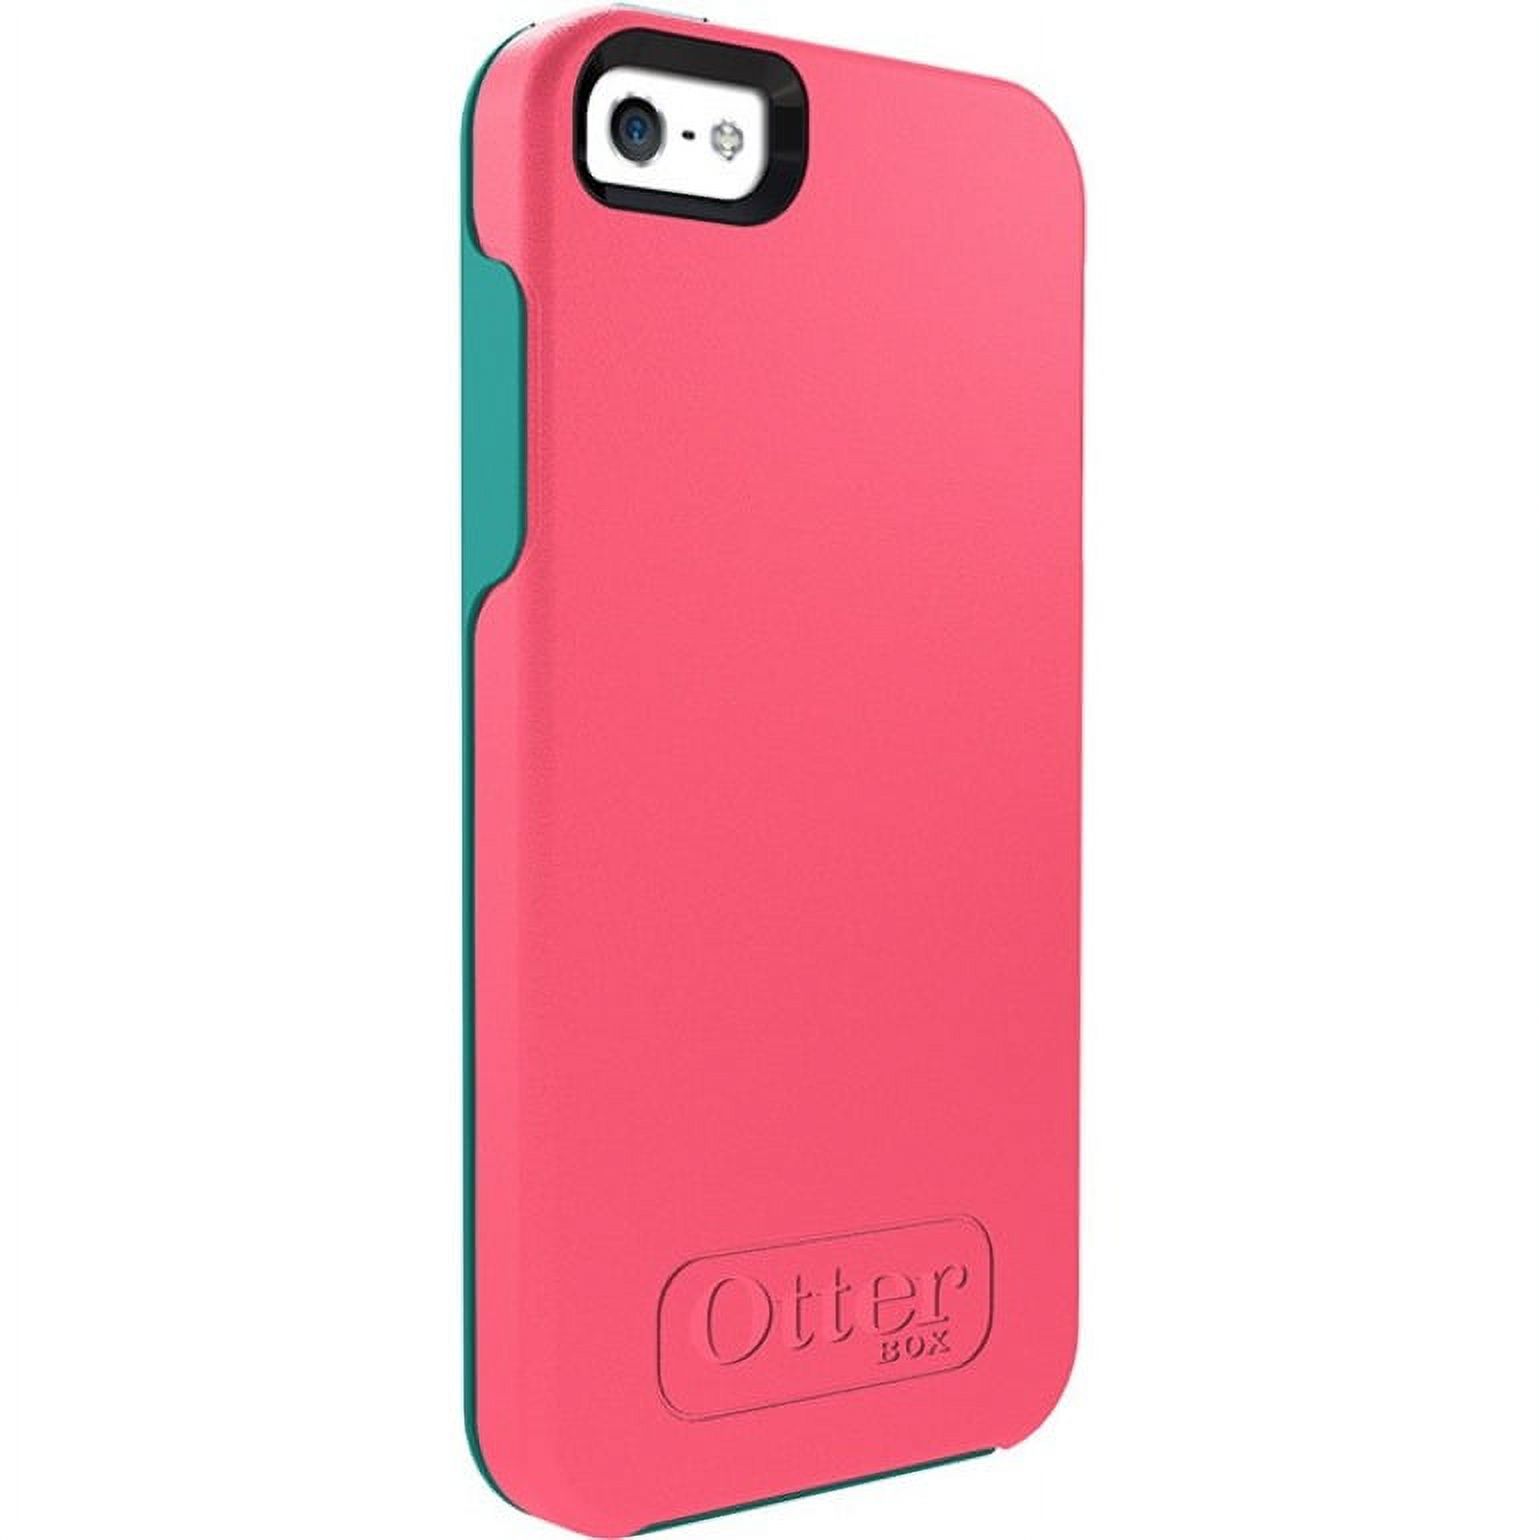 OtterBox Symmetry Series for Apple iPhone 5/5s - image 4 of 4